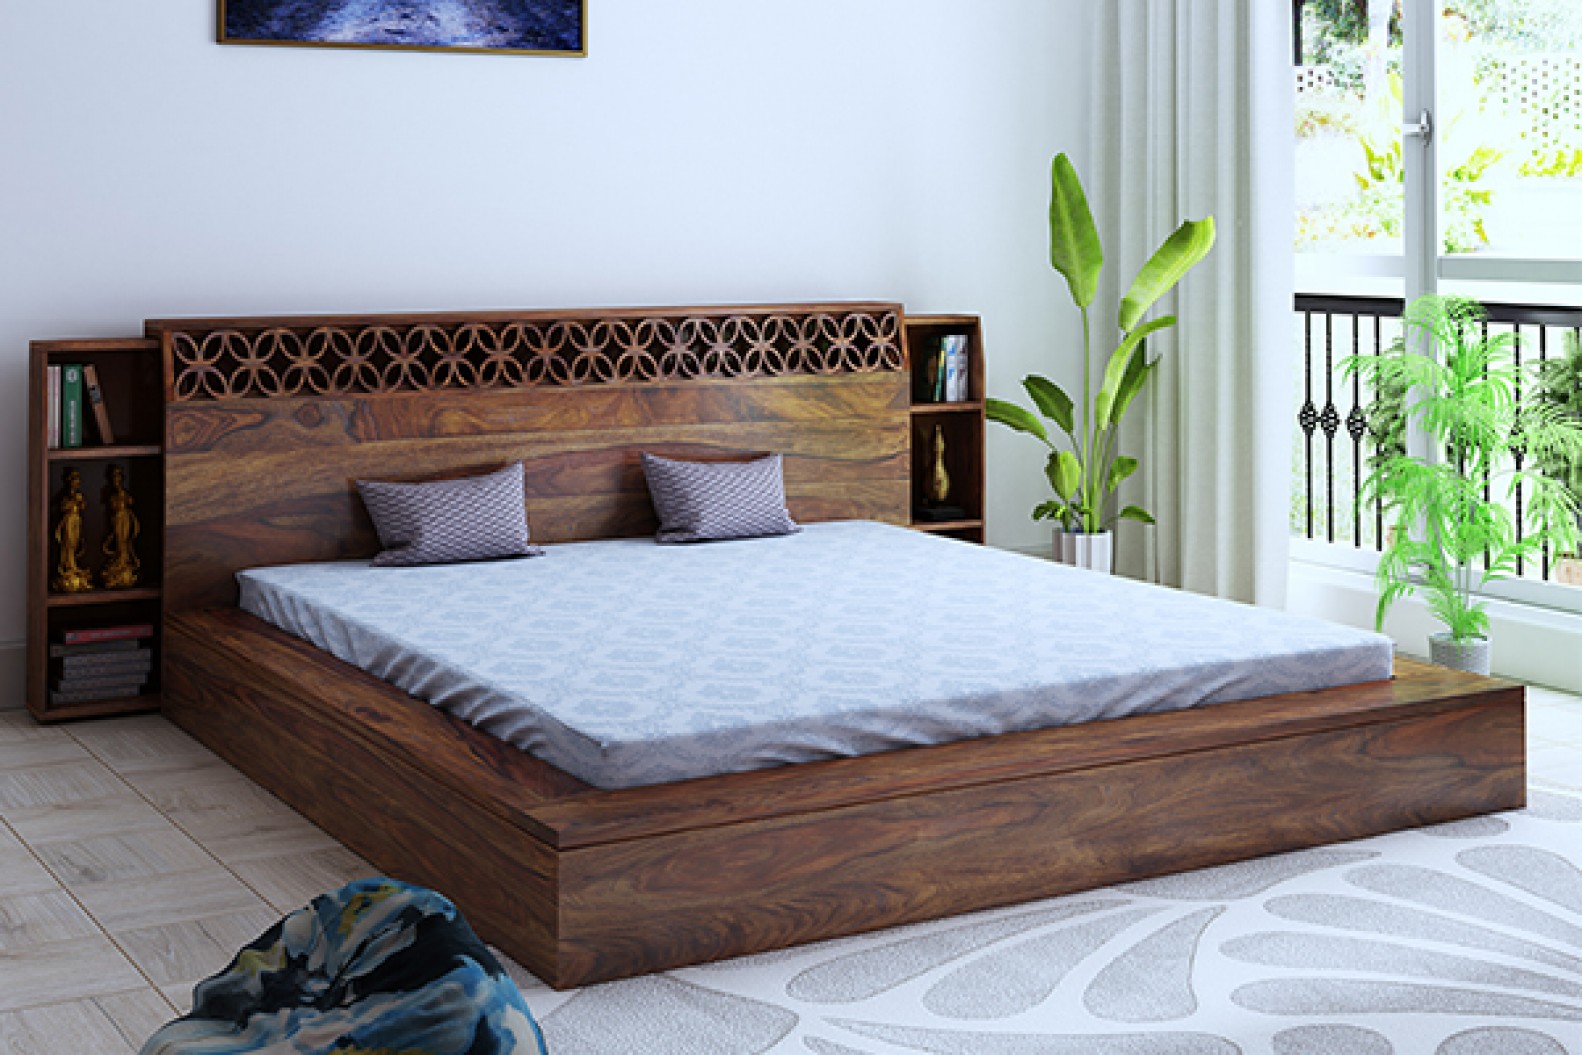 King Size Bed @ Upto 60% Off: Buy King Size Beds Online at Best Prices - PlusOne India